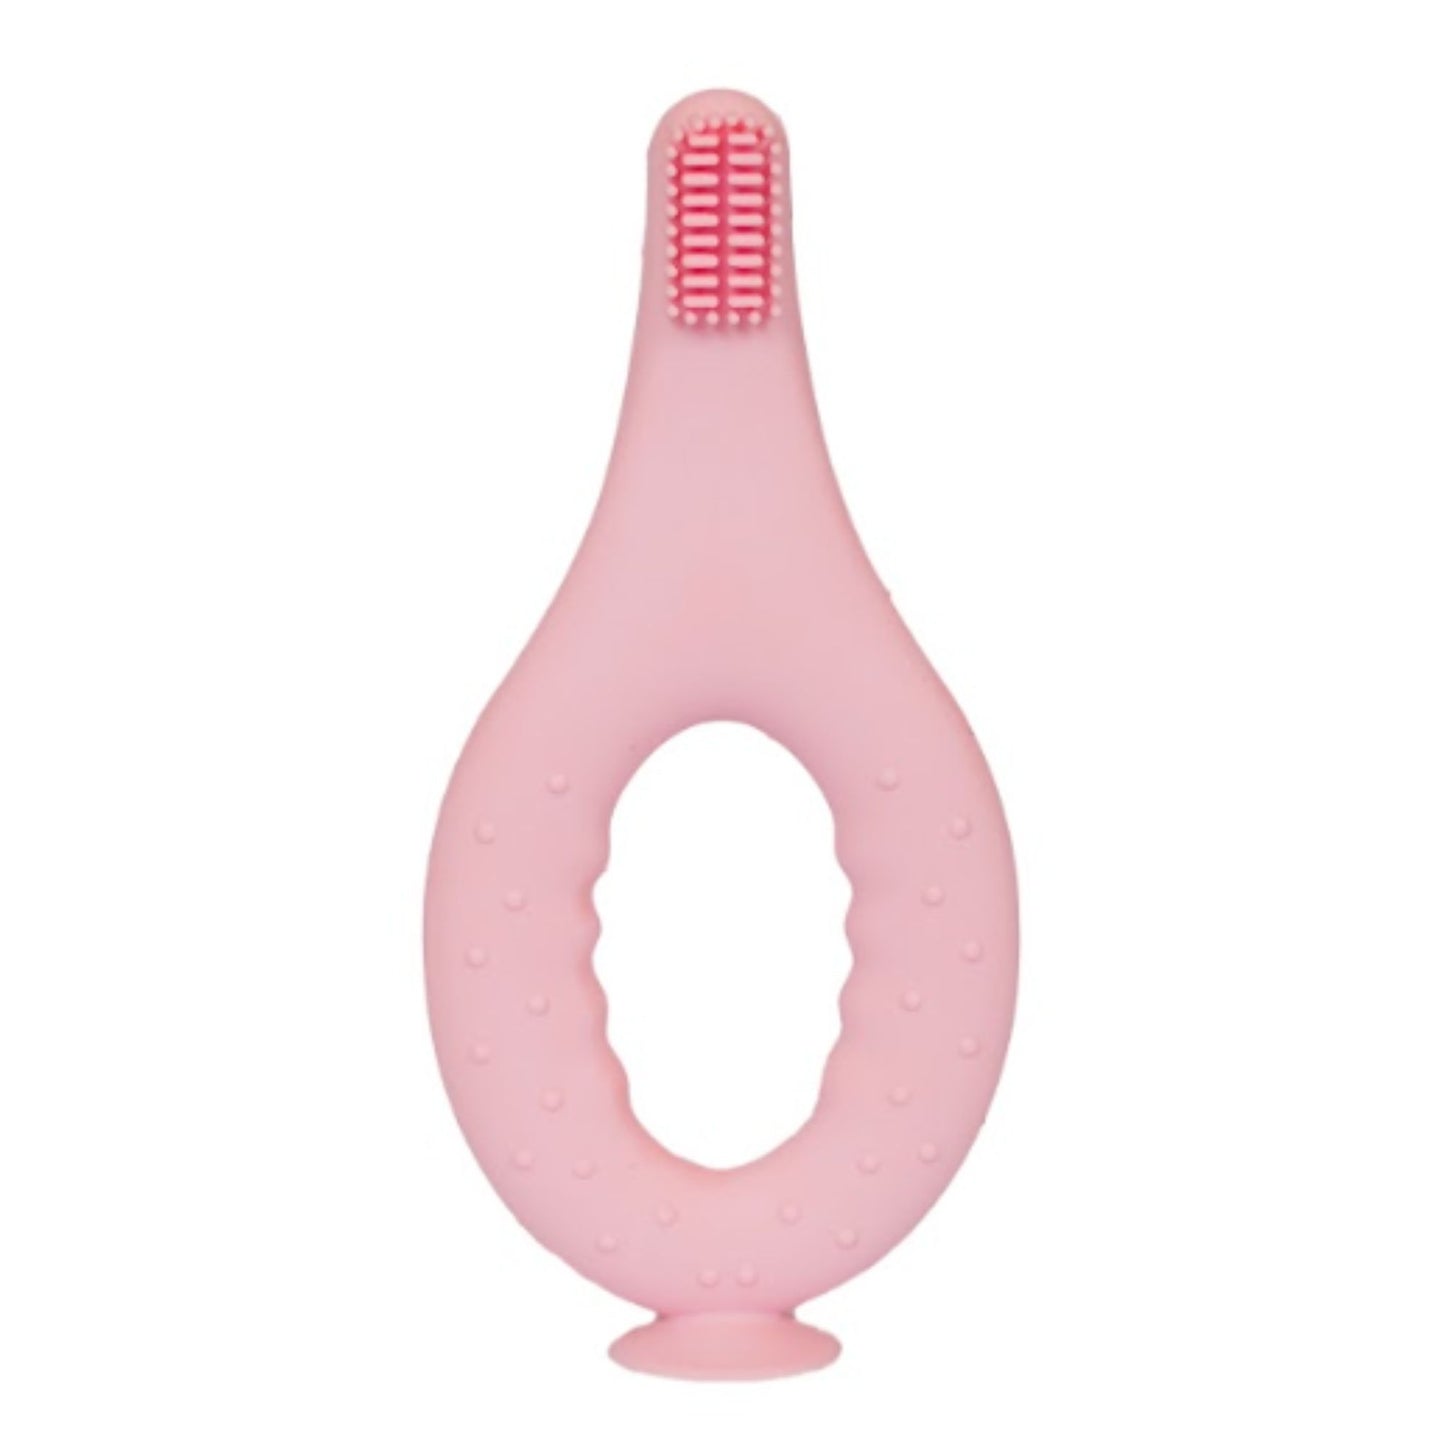 SansFluo Infant’s Silicone Training Toothbrush with Soft Teether